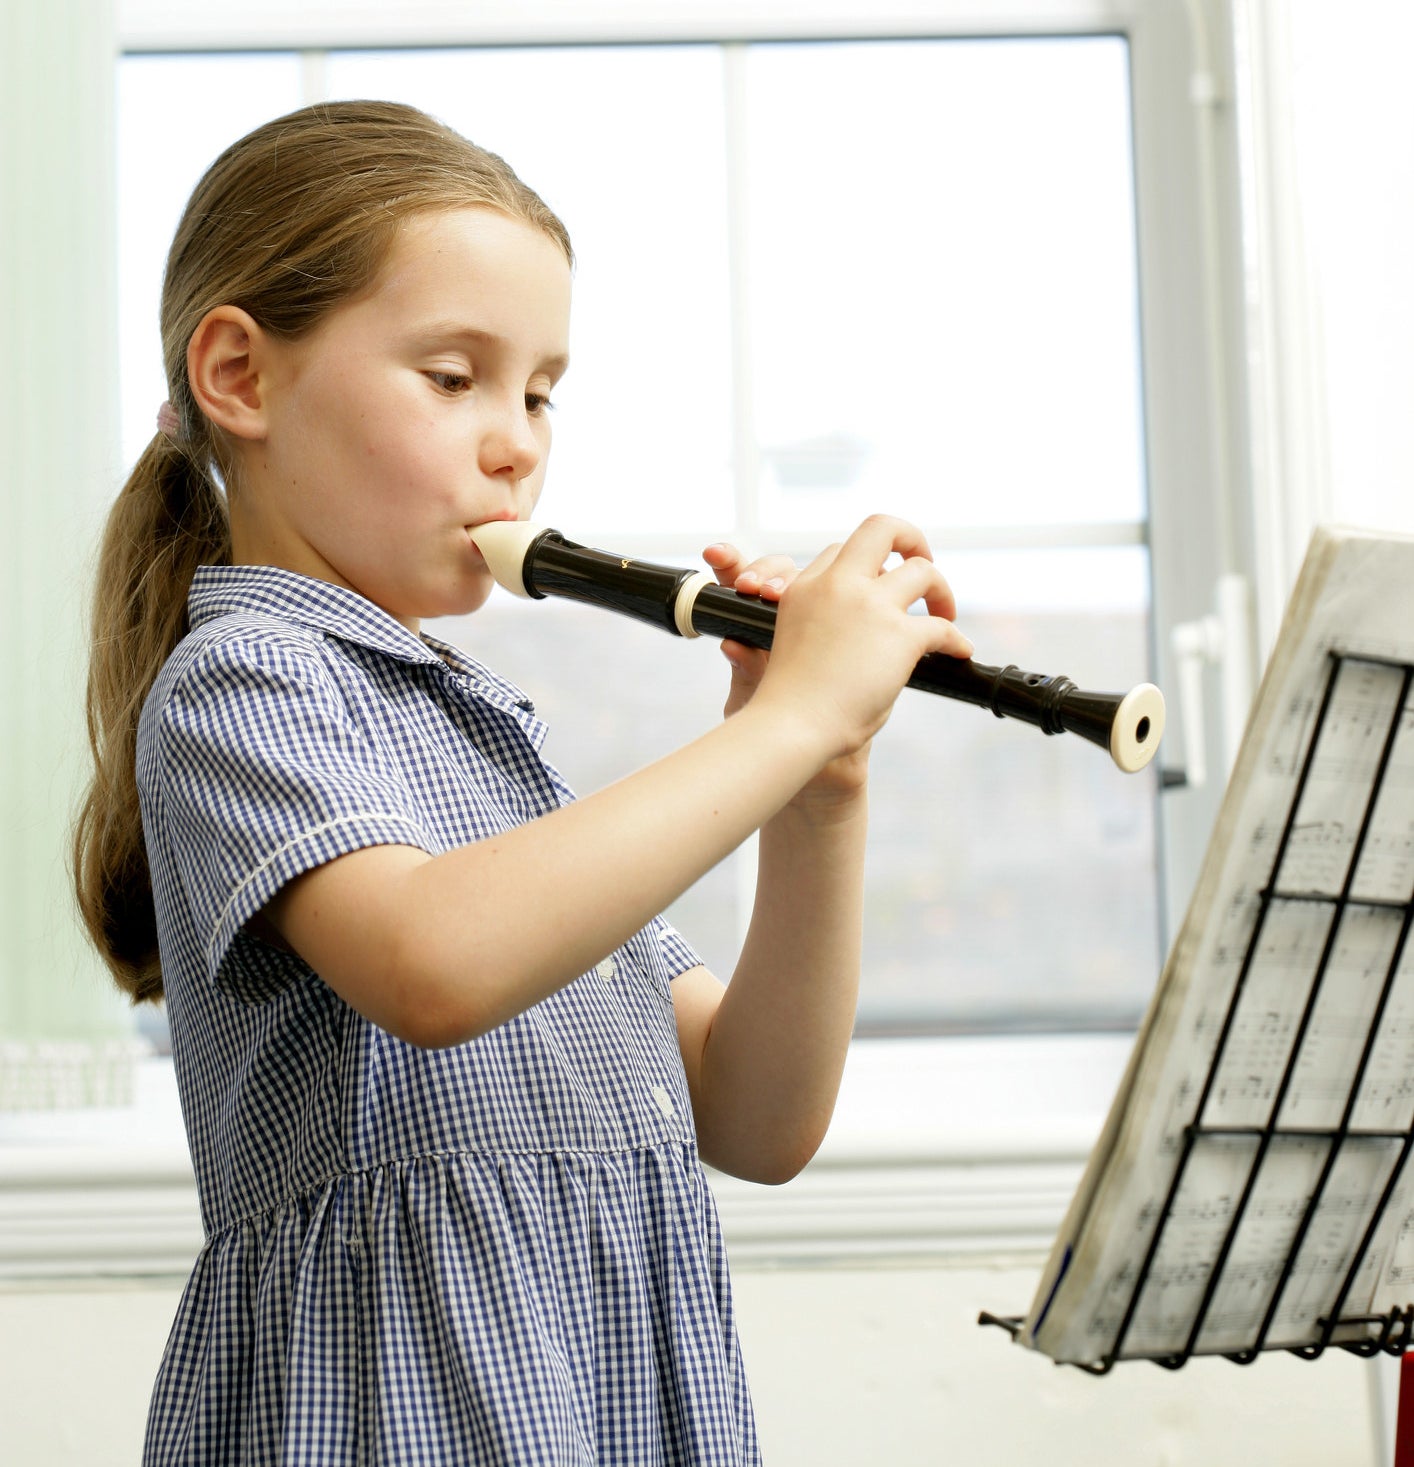 A young girl playing the recorder while looking at sheet music